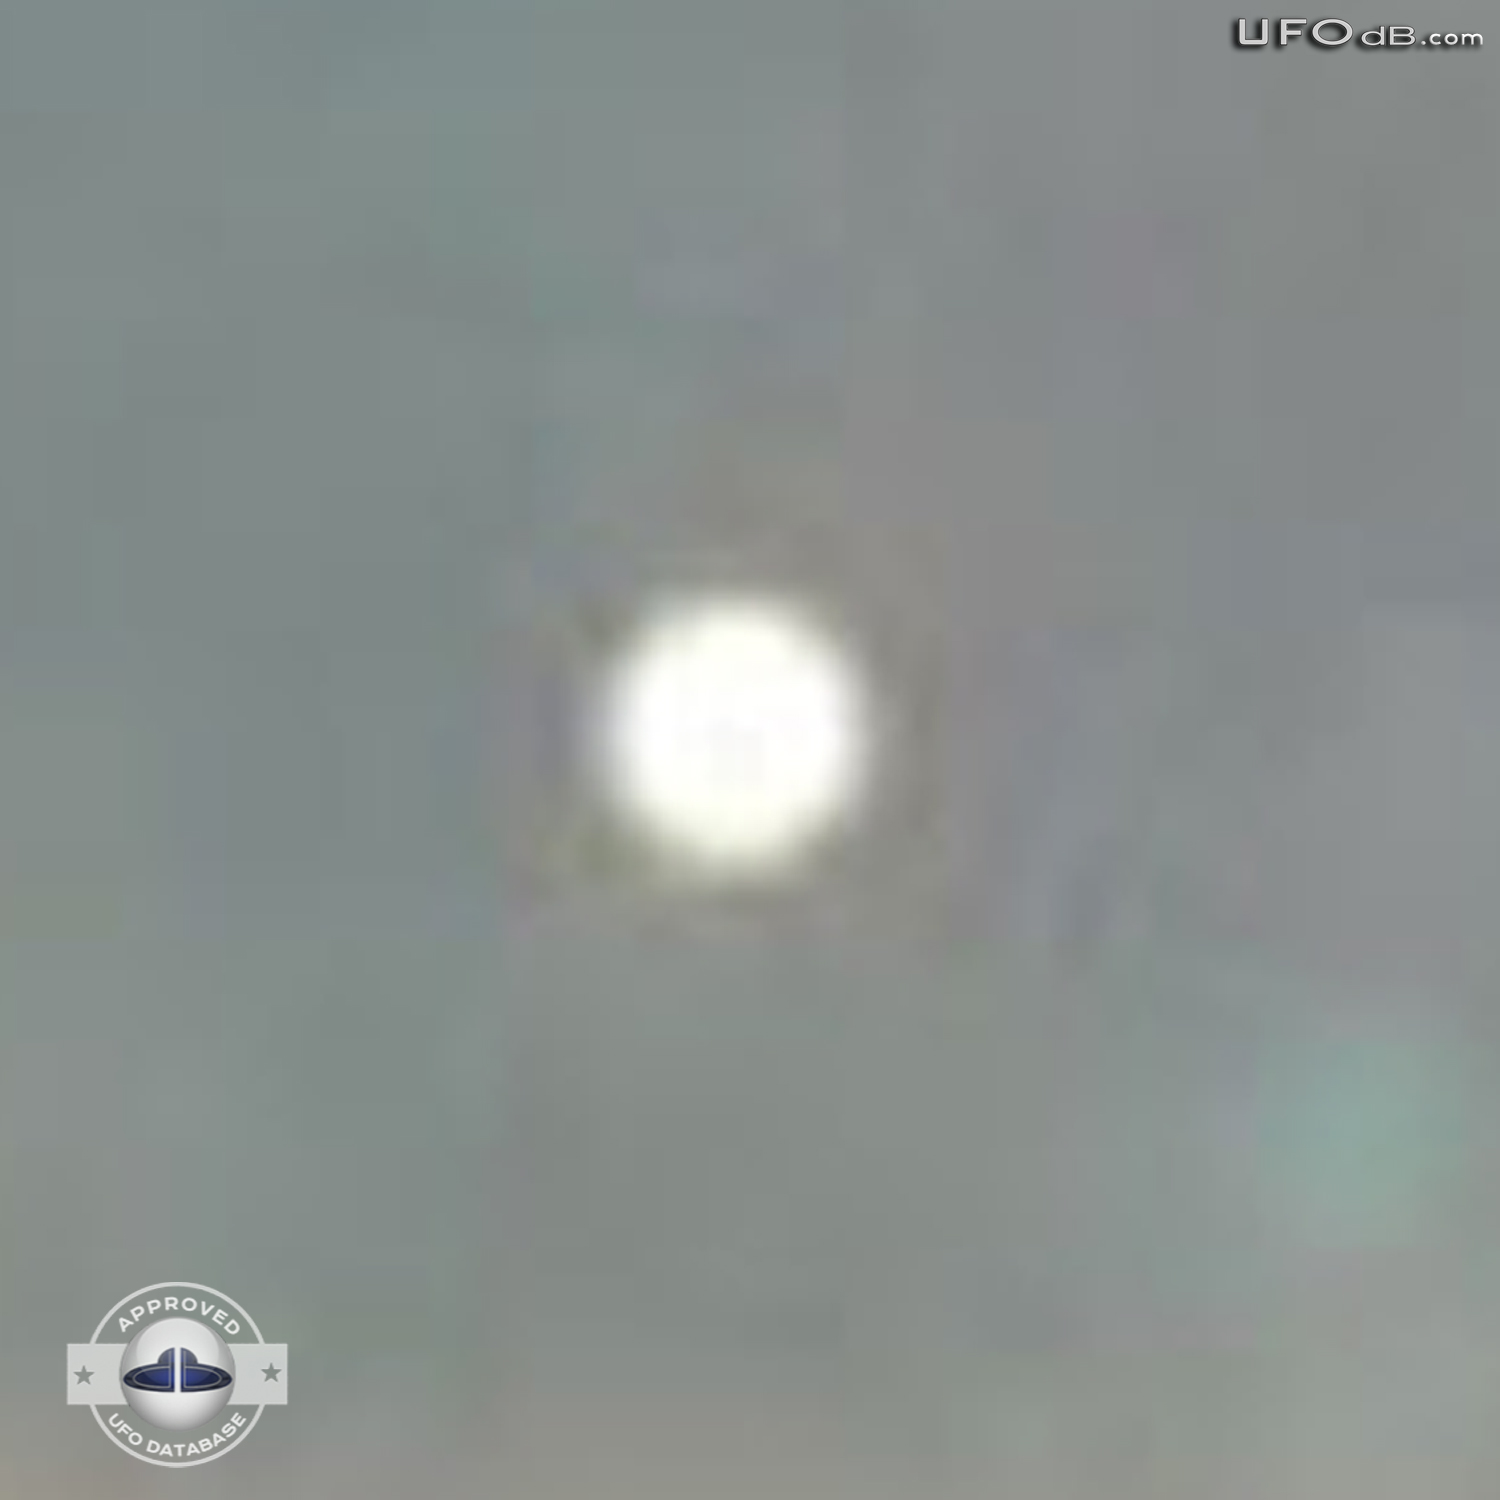 Huge halo around the sun with UFO moving near by in Johannesburg 2010 UFO Picture #348-3